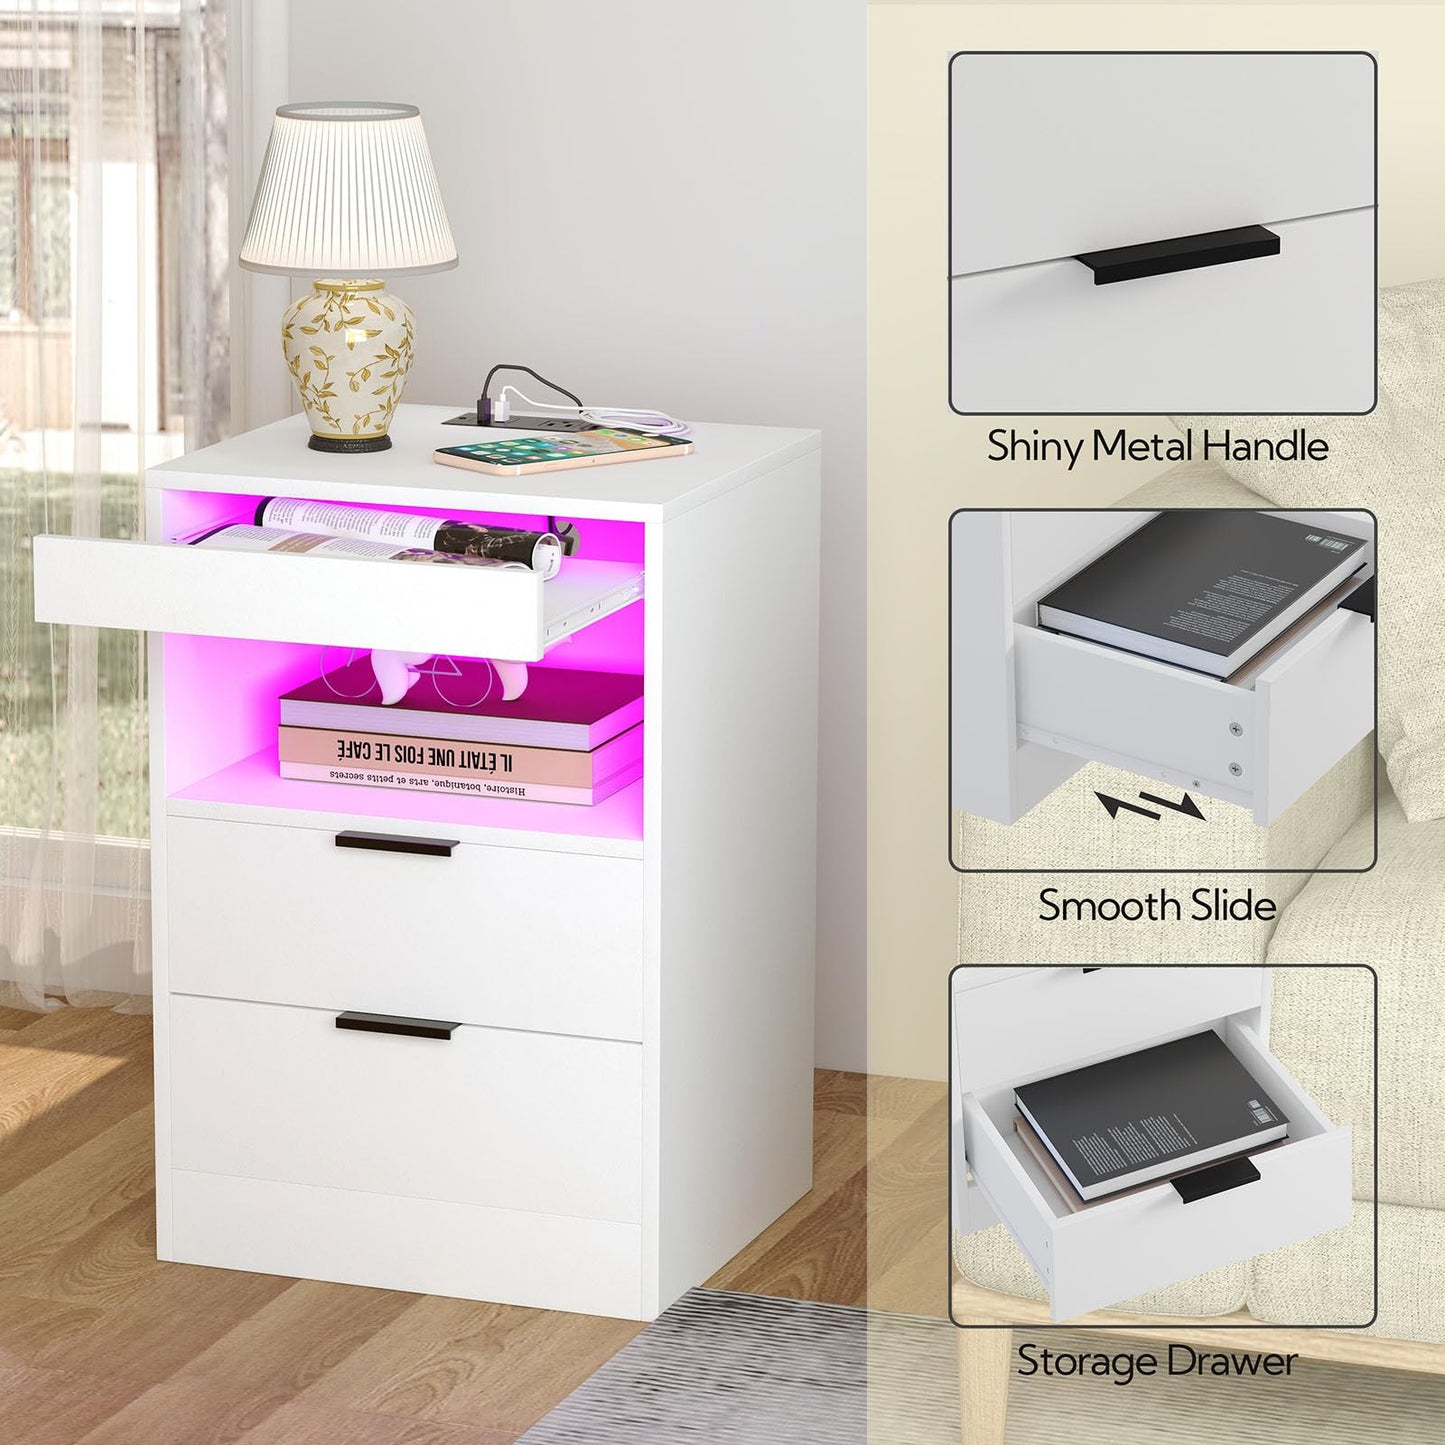 Yusong LED Nightstand Bedside Table with Charging Station 2 Drawers, White Modern Sofa Couch End Side Table with LED Lights and Pull-Out Shelf for Bedroom Living Room, Wooden